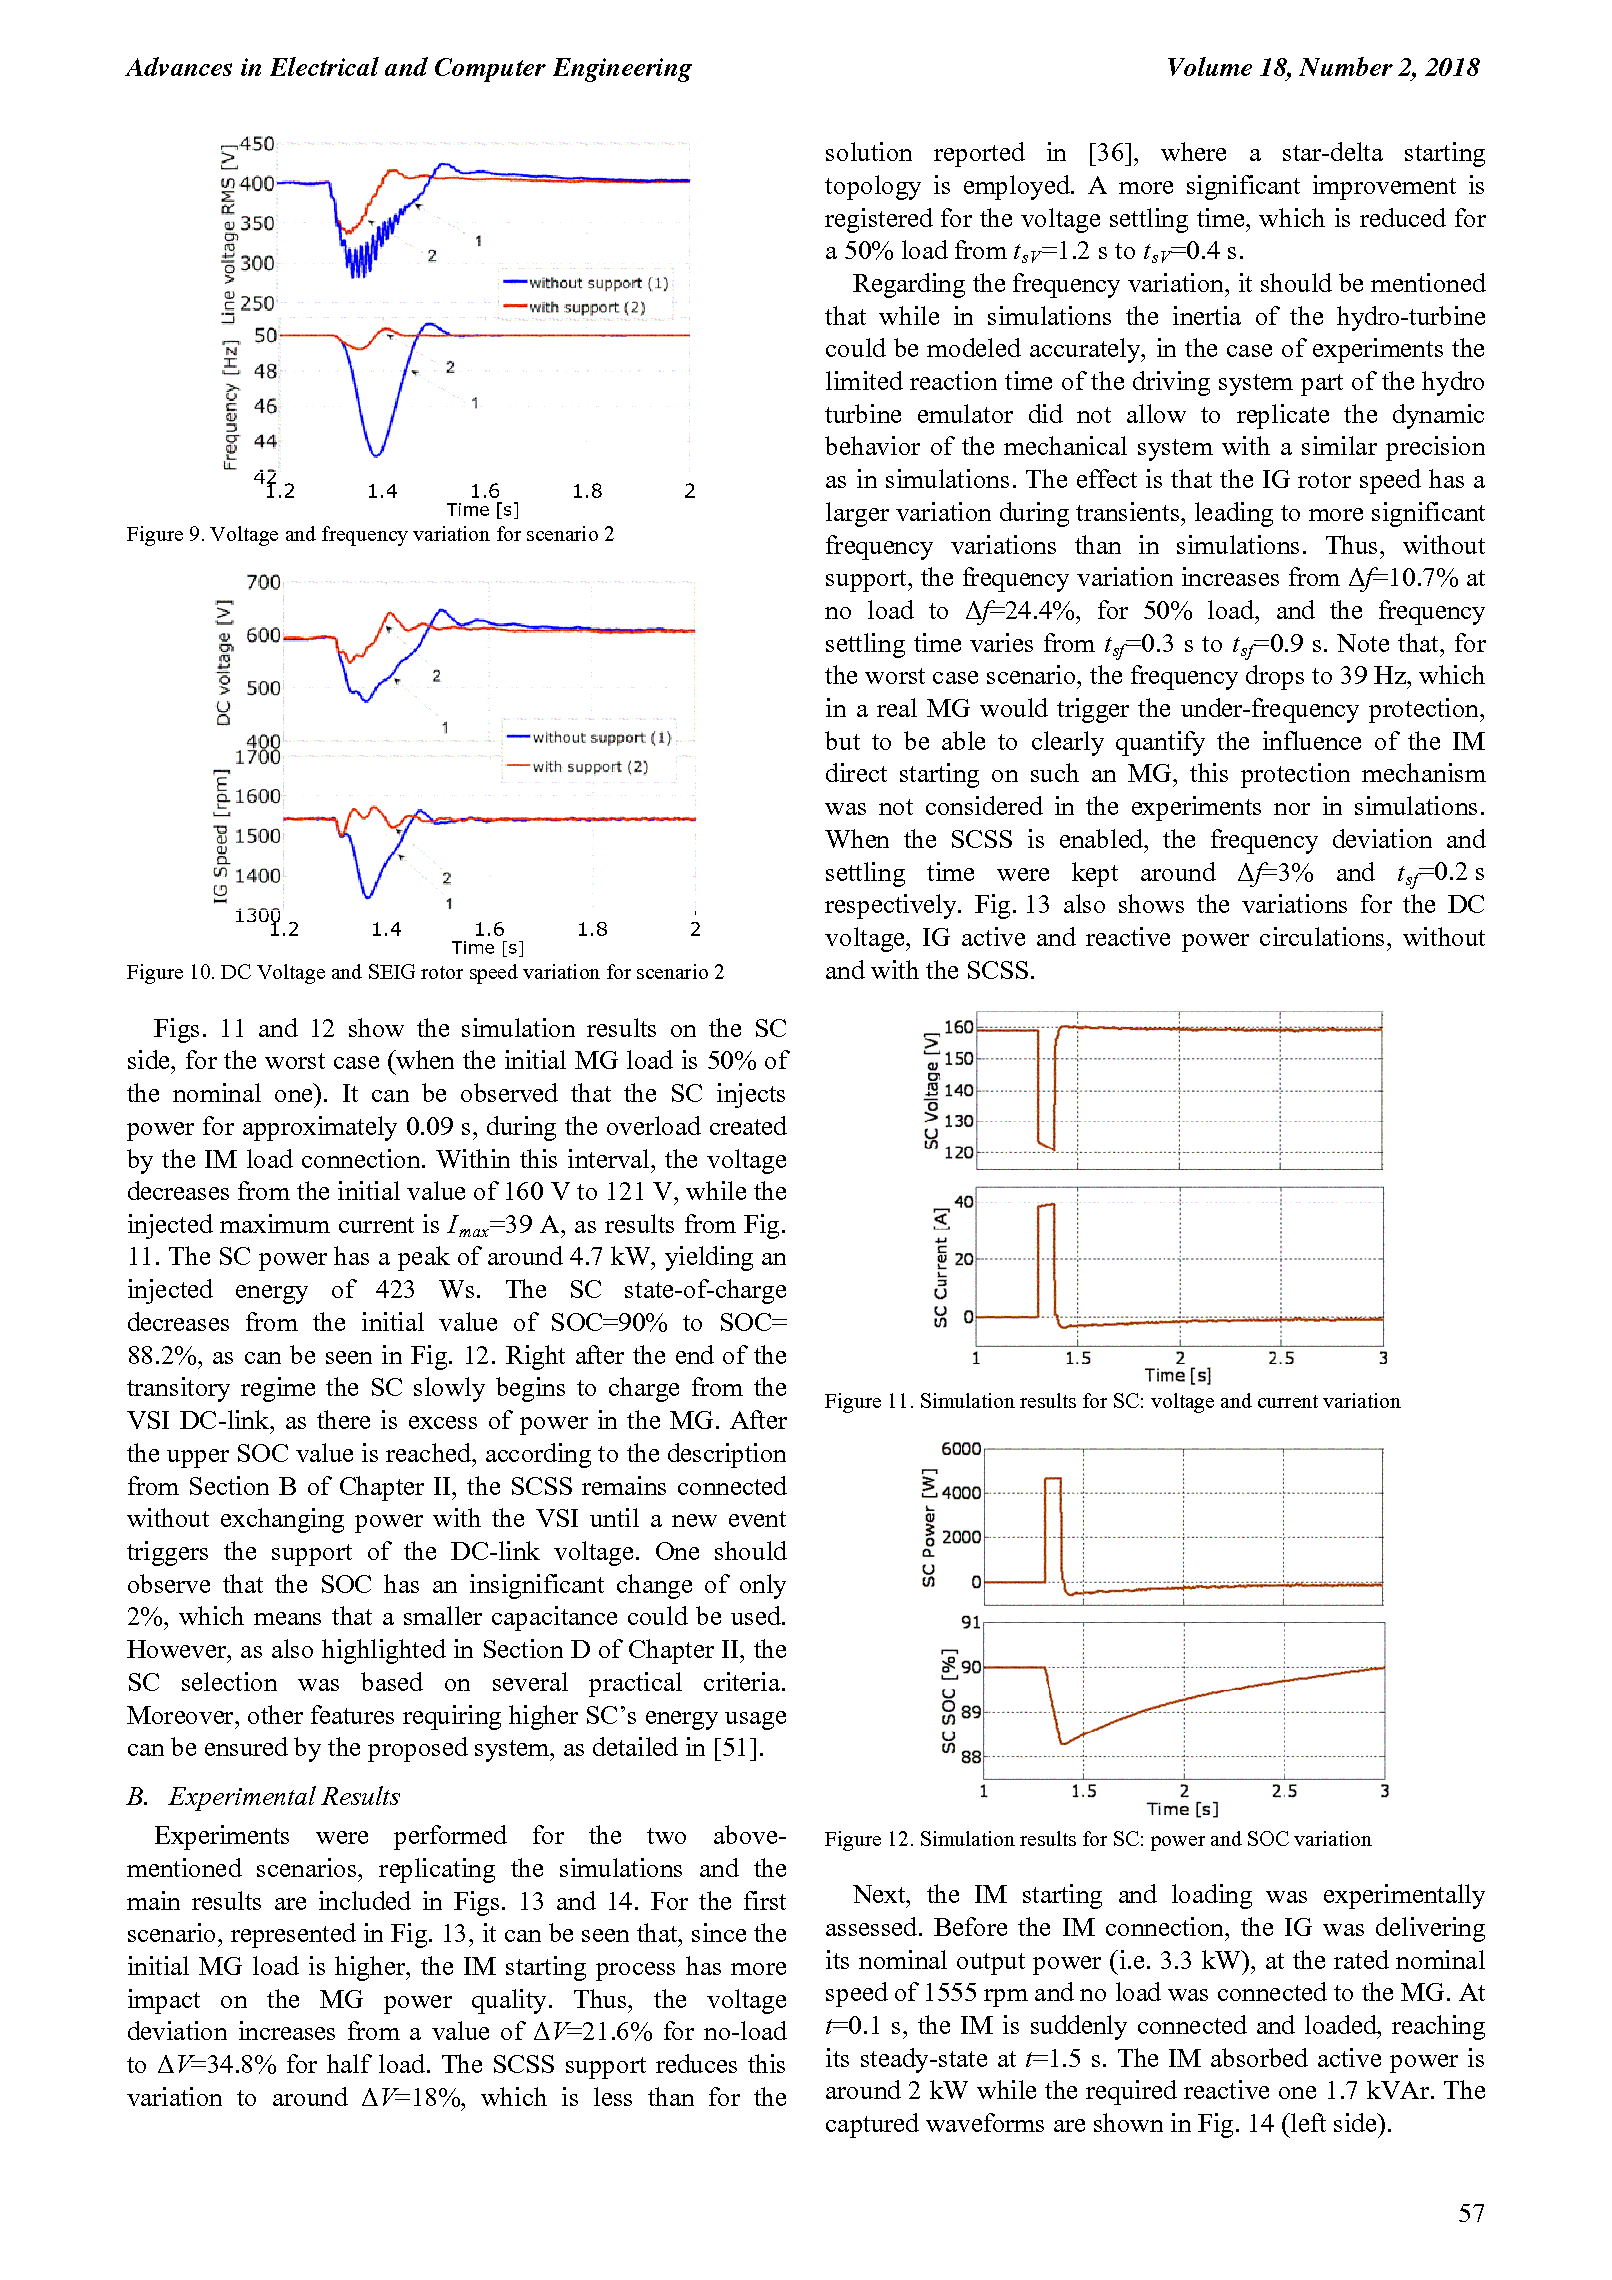 PDF Quickview for paper with DOI:10.4316/AECE.2018.02007